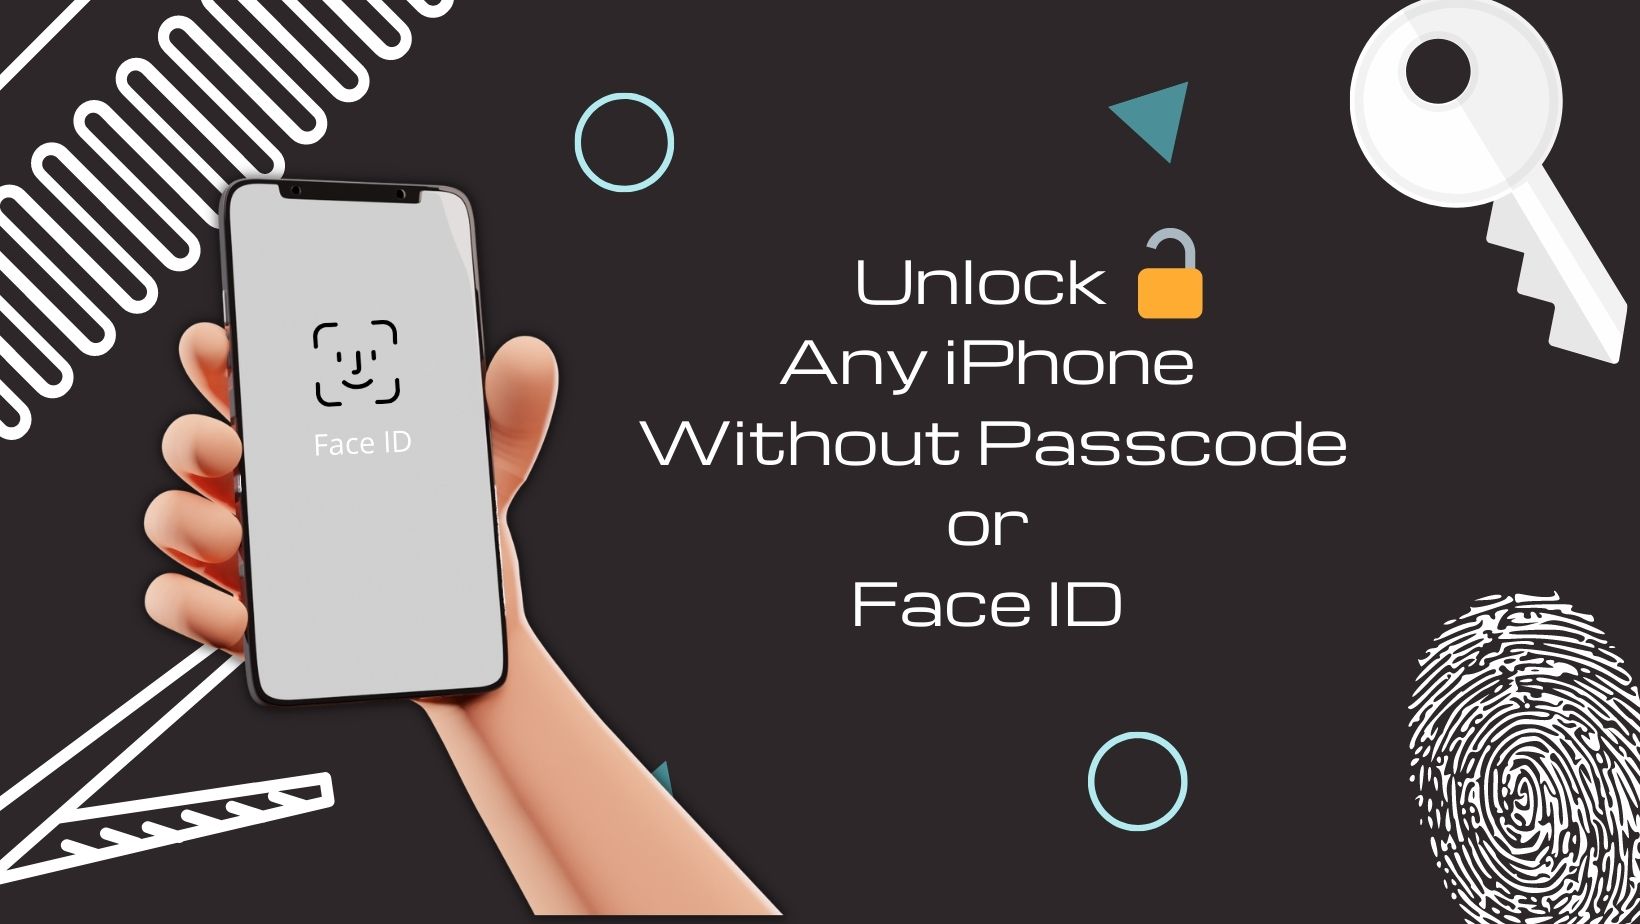 How to Unlock Any iPhone Without a Passcode or Face ID?